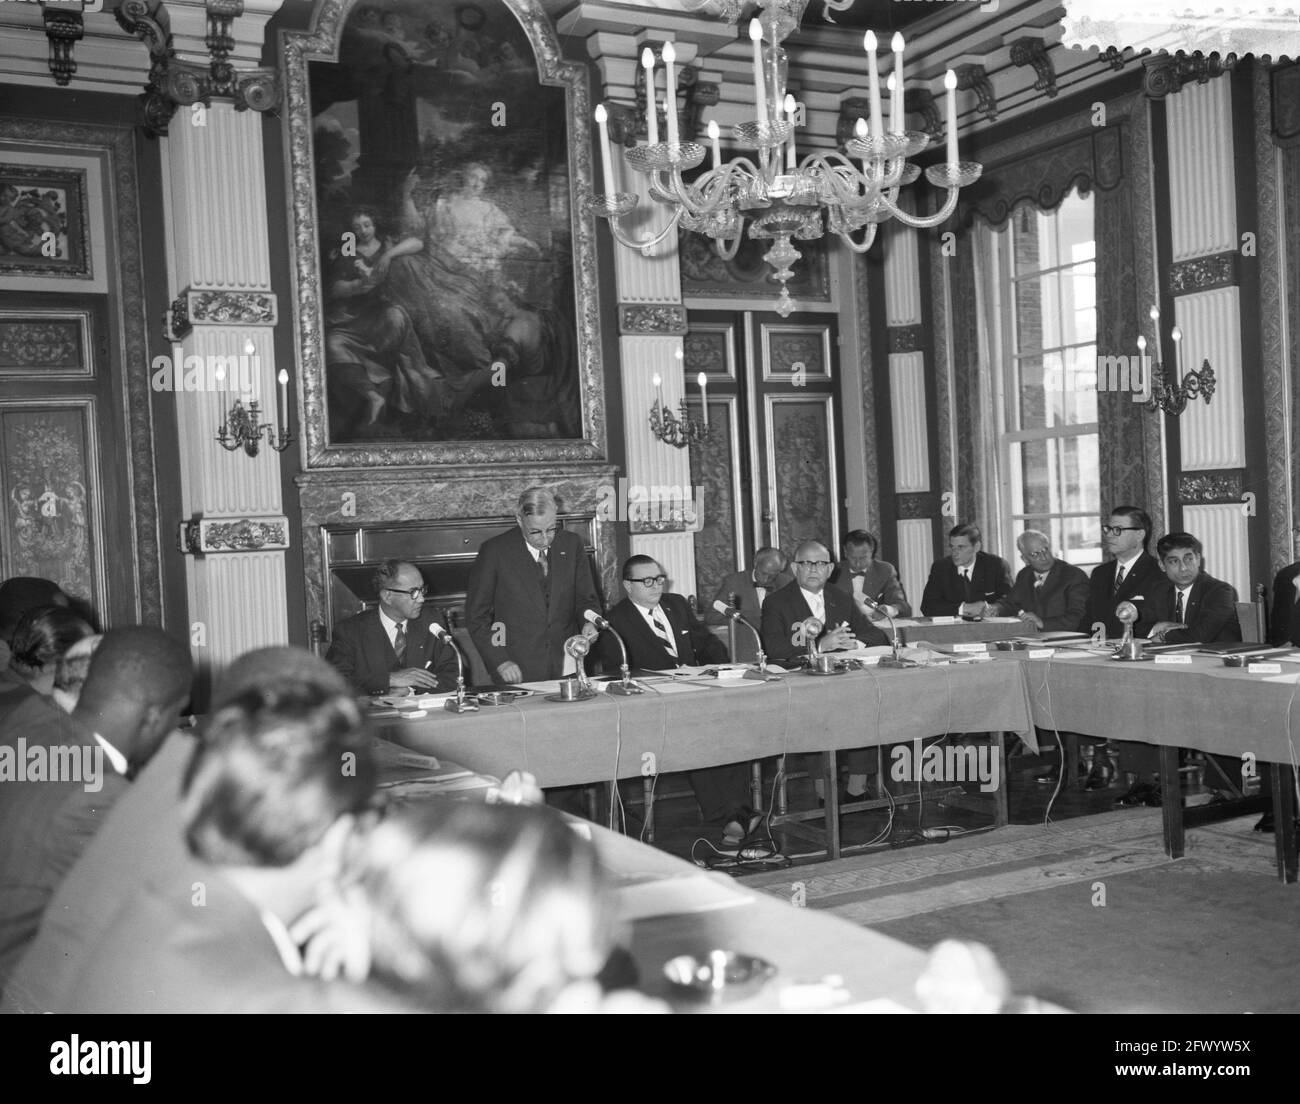 Round Table Conference in the Treves Room. Overview of the session, May 29, 1961, conferences, The Netherlands, 20th century press agency photo, news to remember, documentary, historic photography 1945-1990, visual stories, human history of the Twentieth Century, capturing moments in time Stock Photo